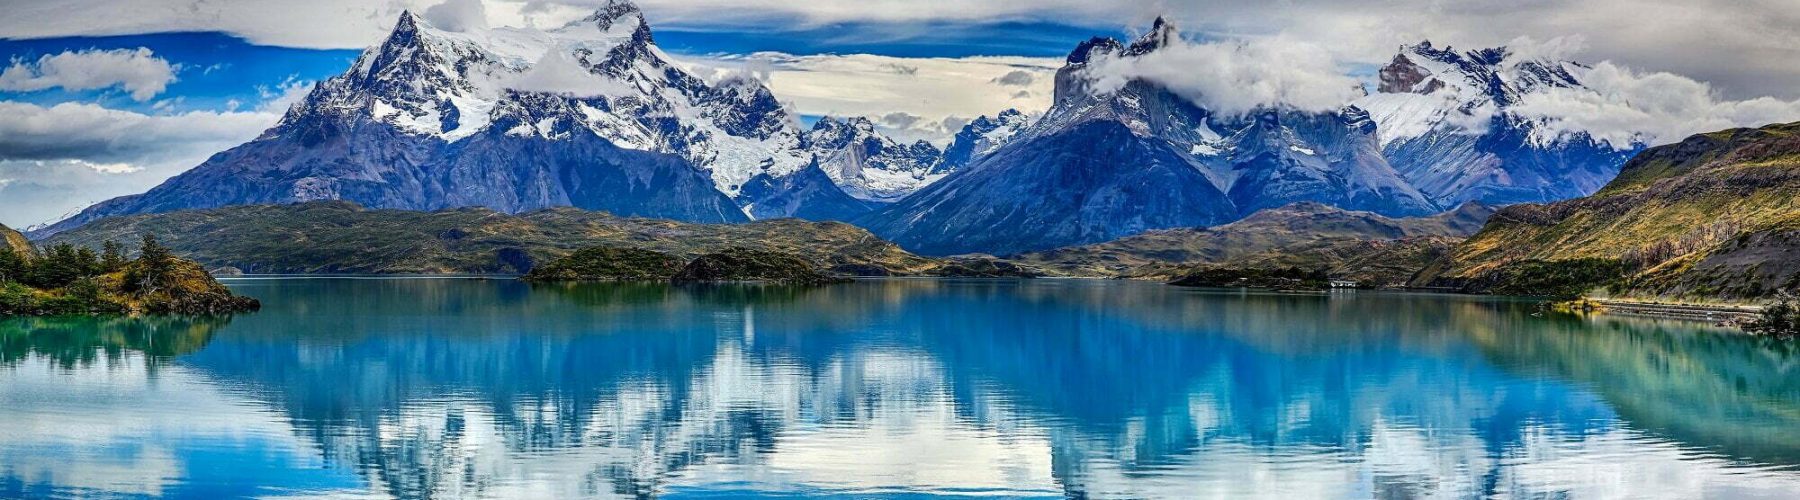 Reflection,Of,Cuernos,Del,Paine,At,Lake,Pehoe,-,Torres